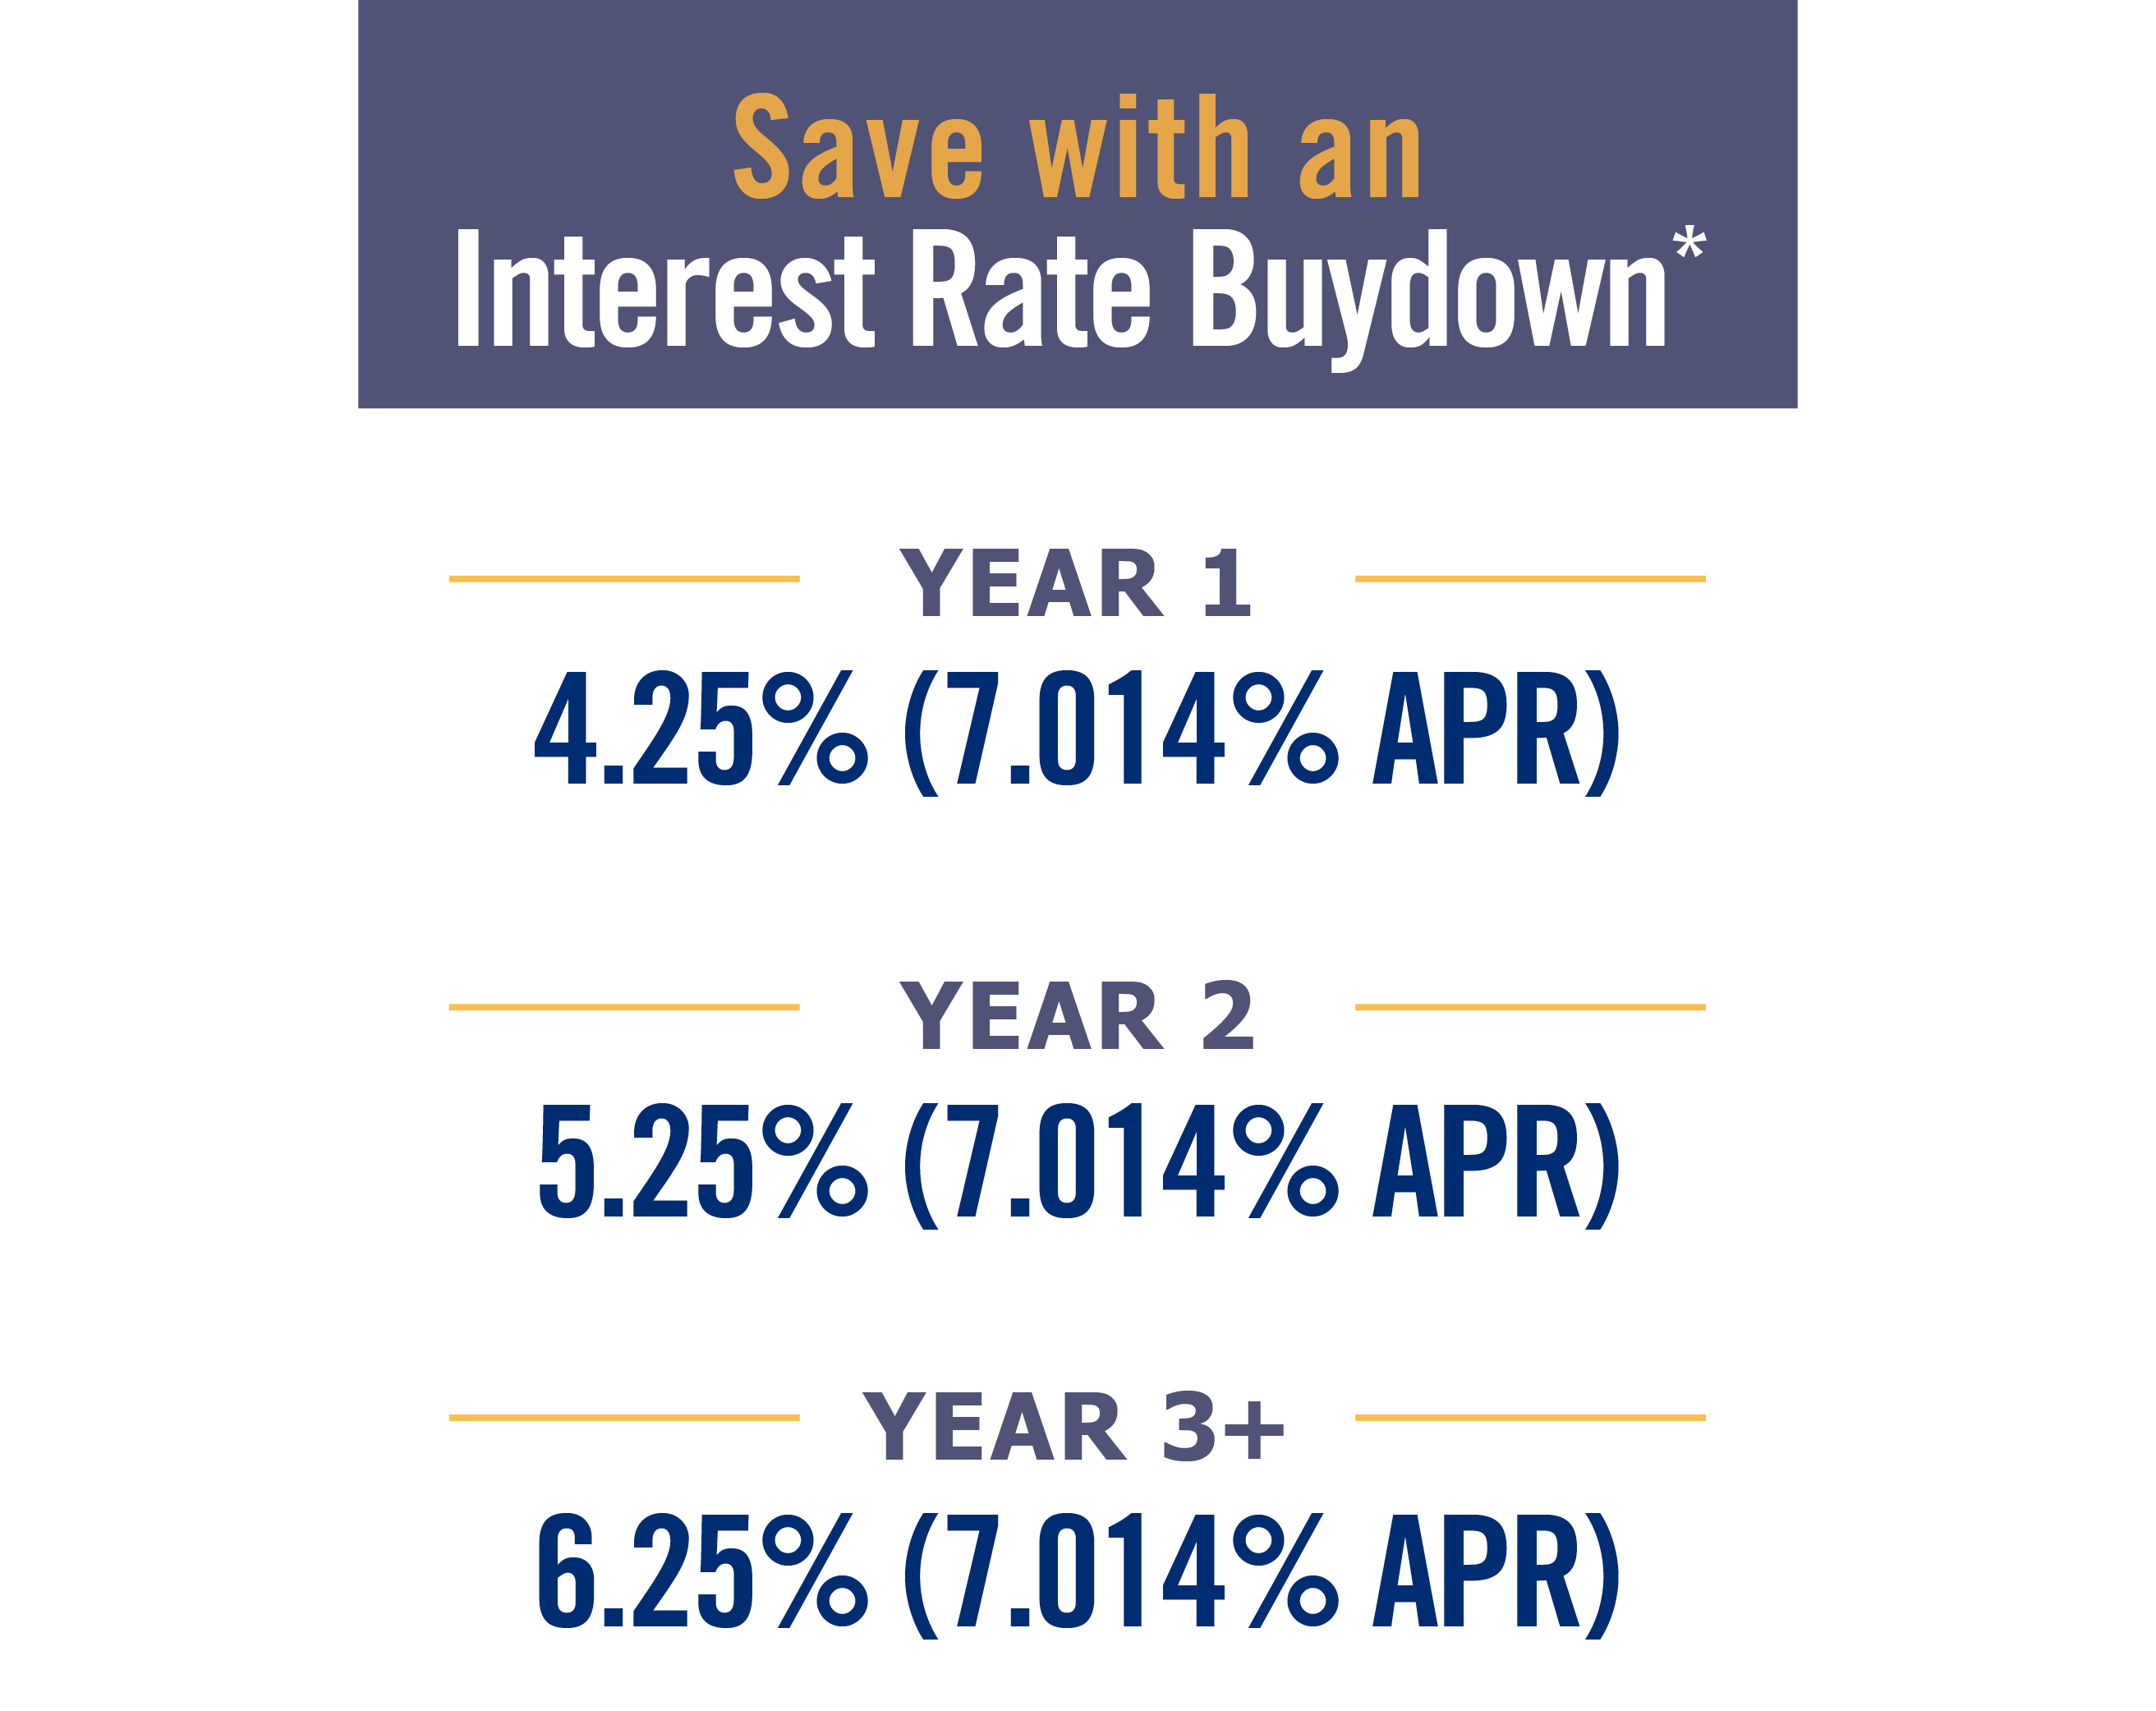 Save with an interest rate buydown*